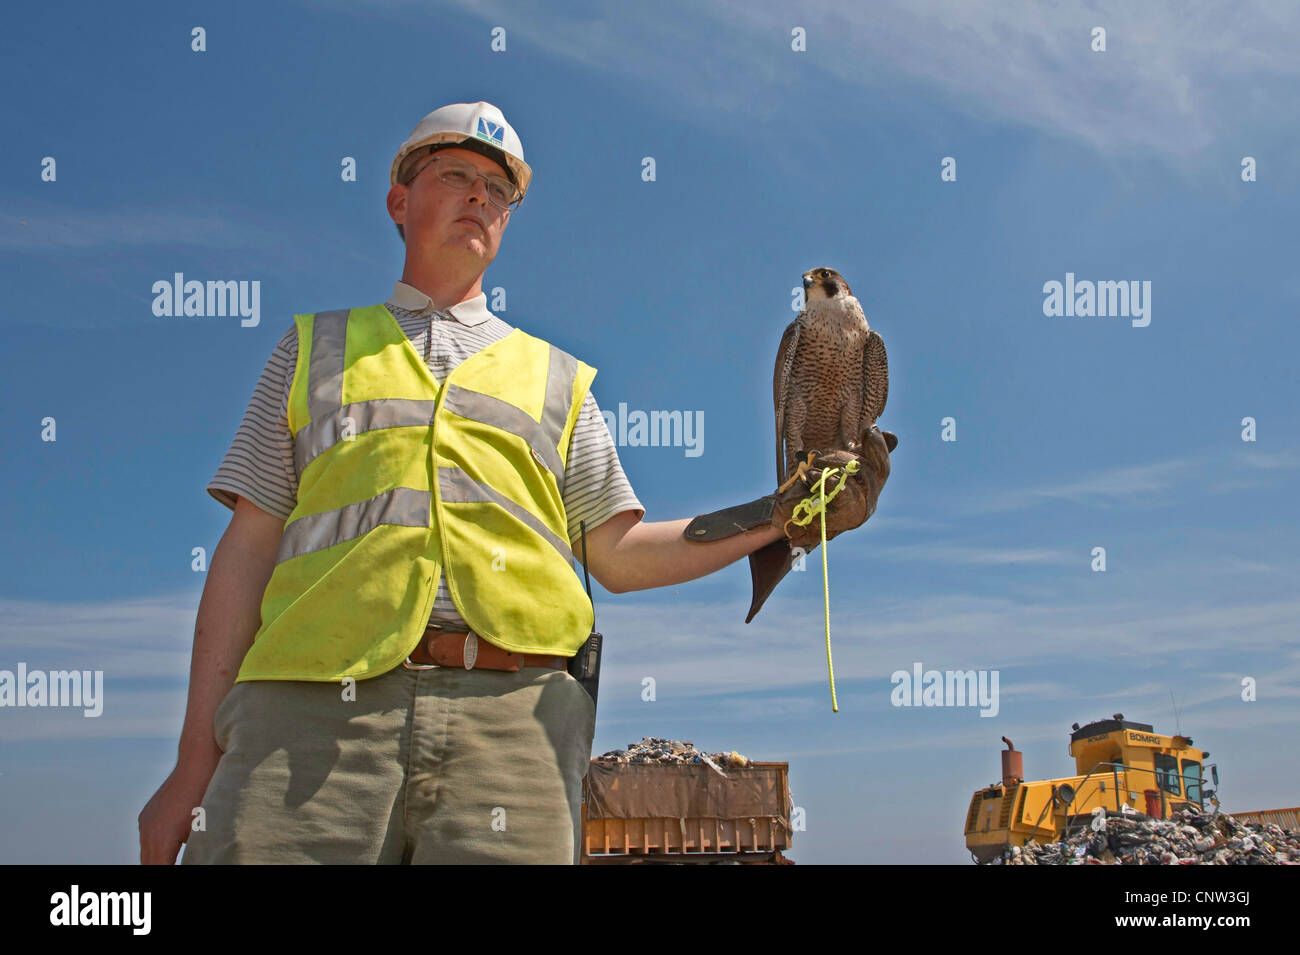 peregrine falcon (Falco peregrinus), used on a waste diposal site by a falconer for catching and detering gulls, United Kingdom, Scotland Stock Photo